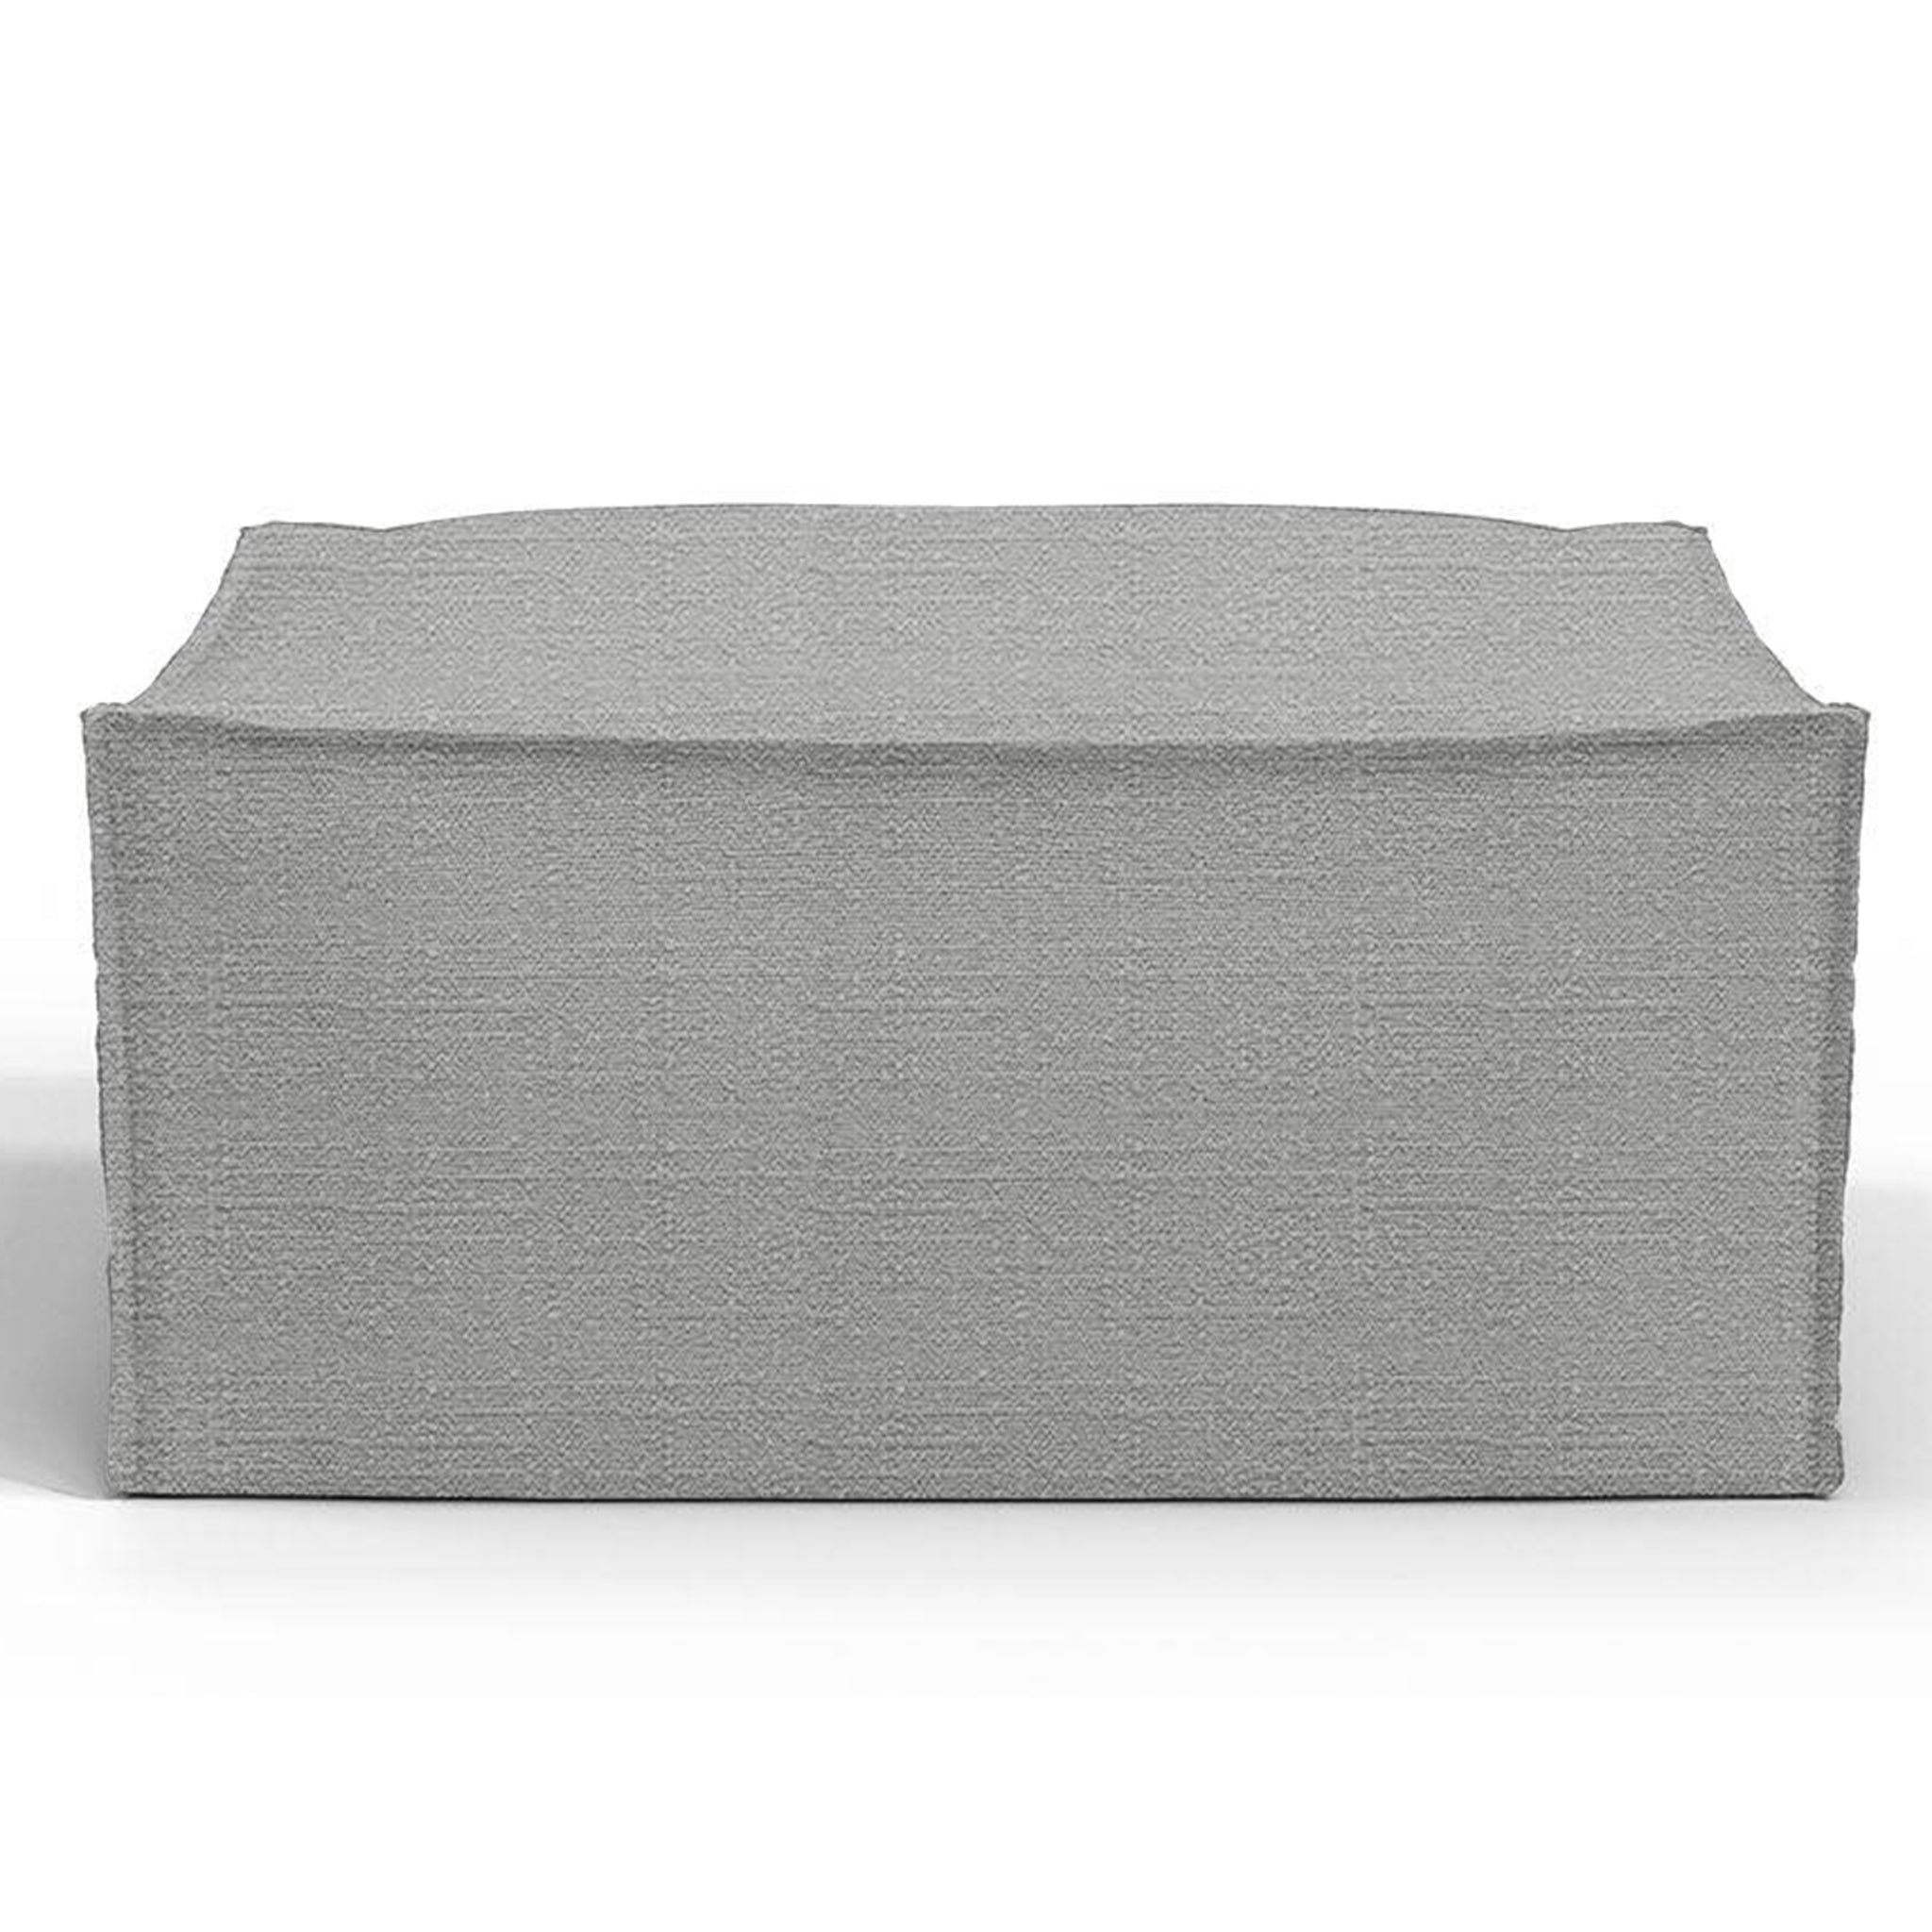 Gray fabric ottoman featuring a minimalist design, ideal for modern living rooms and versatile as a footrest or extra seating.